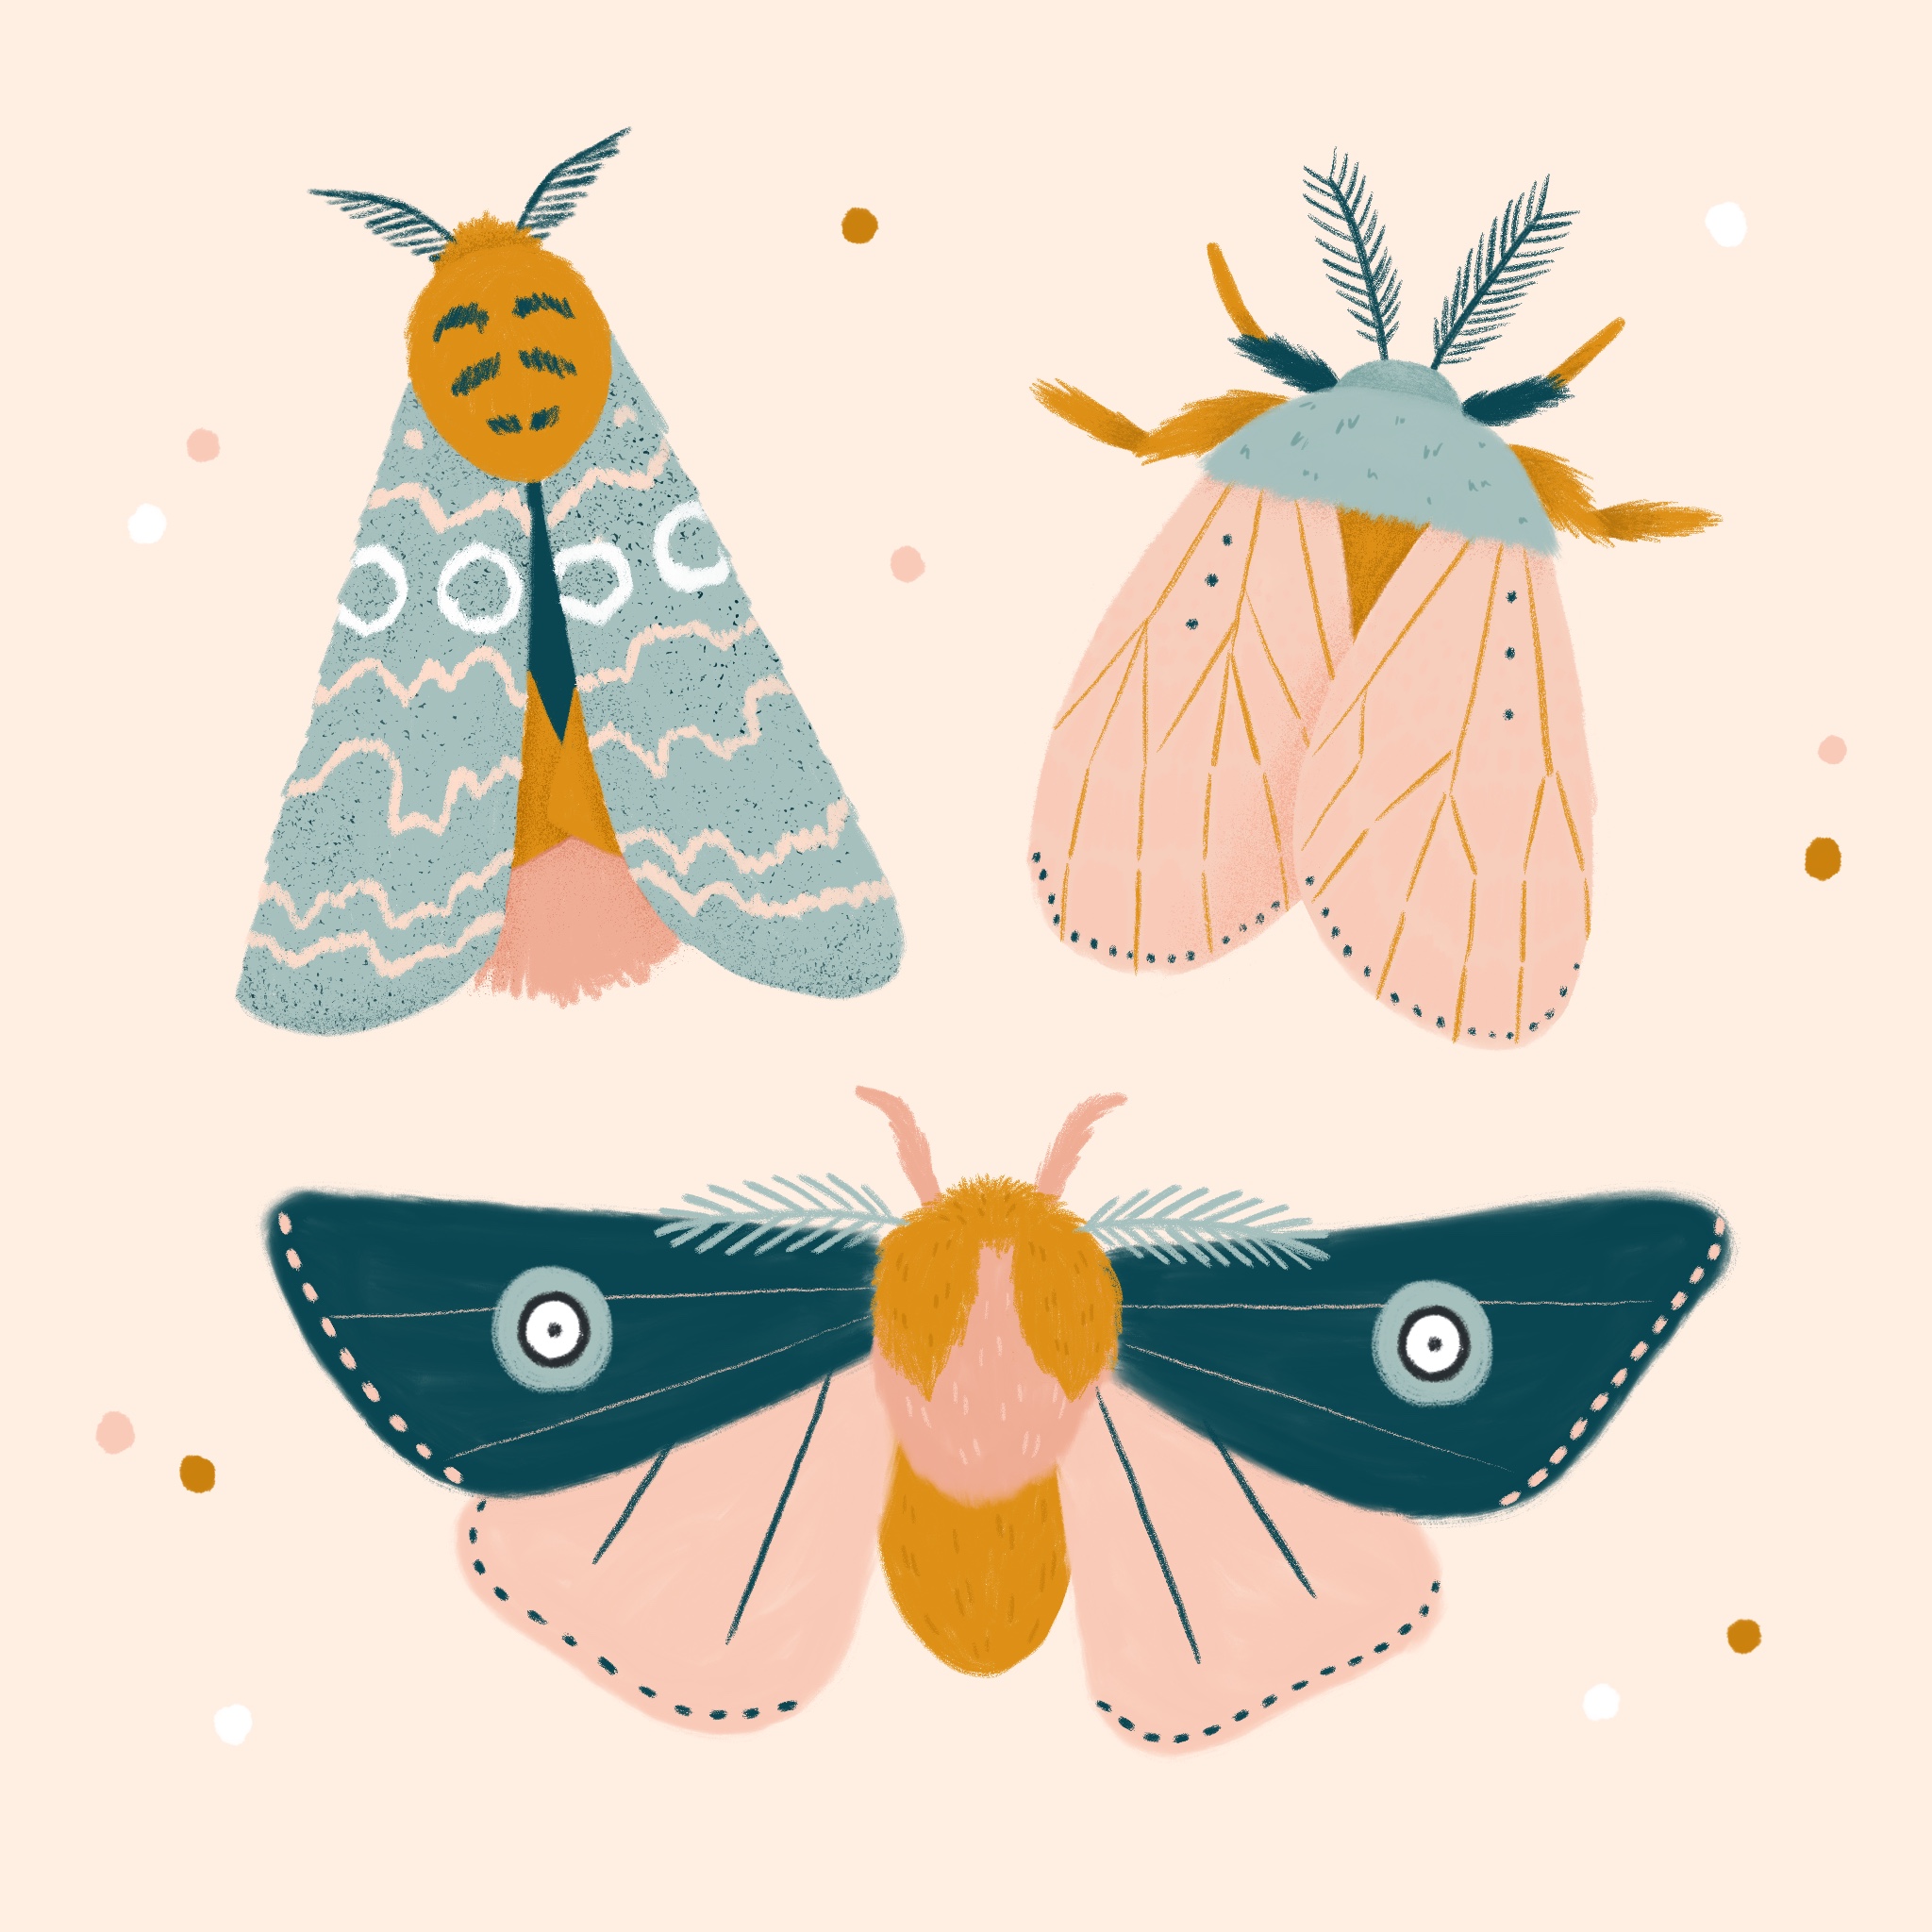 An illustration of three moths with different wing patterns